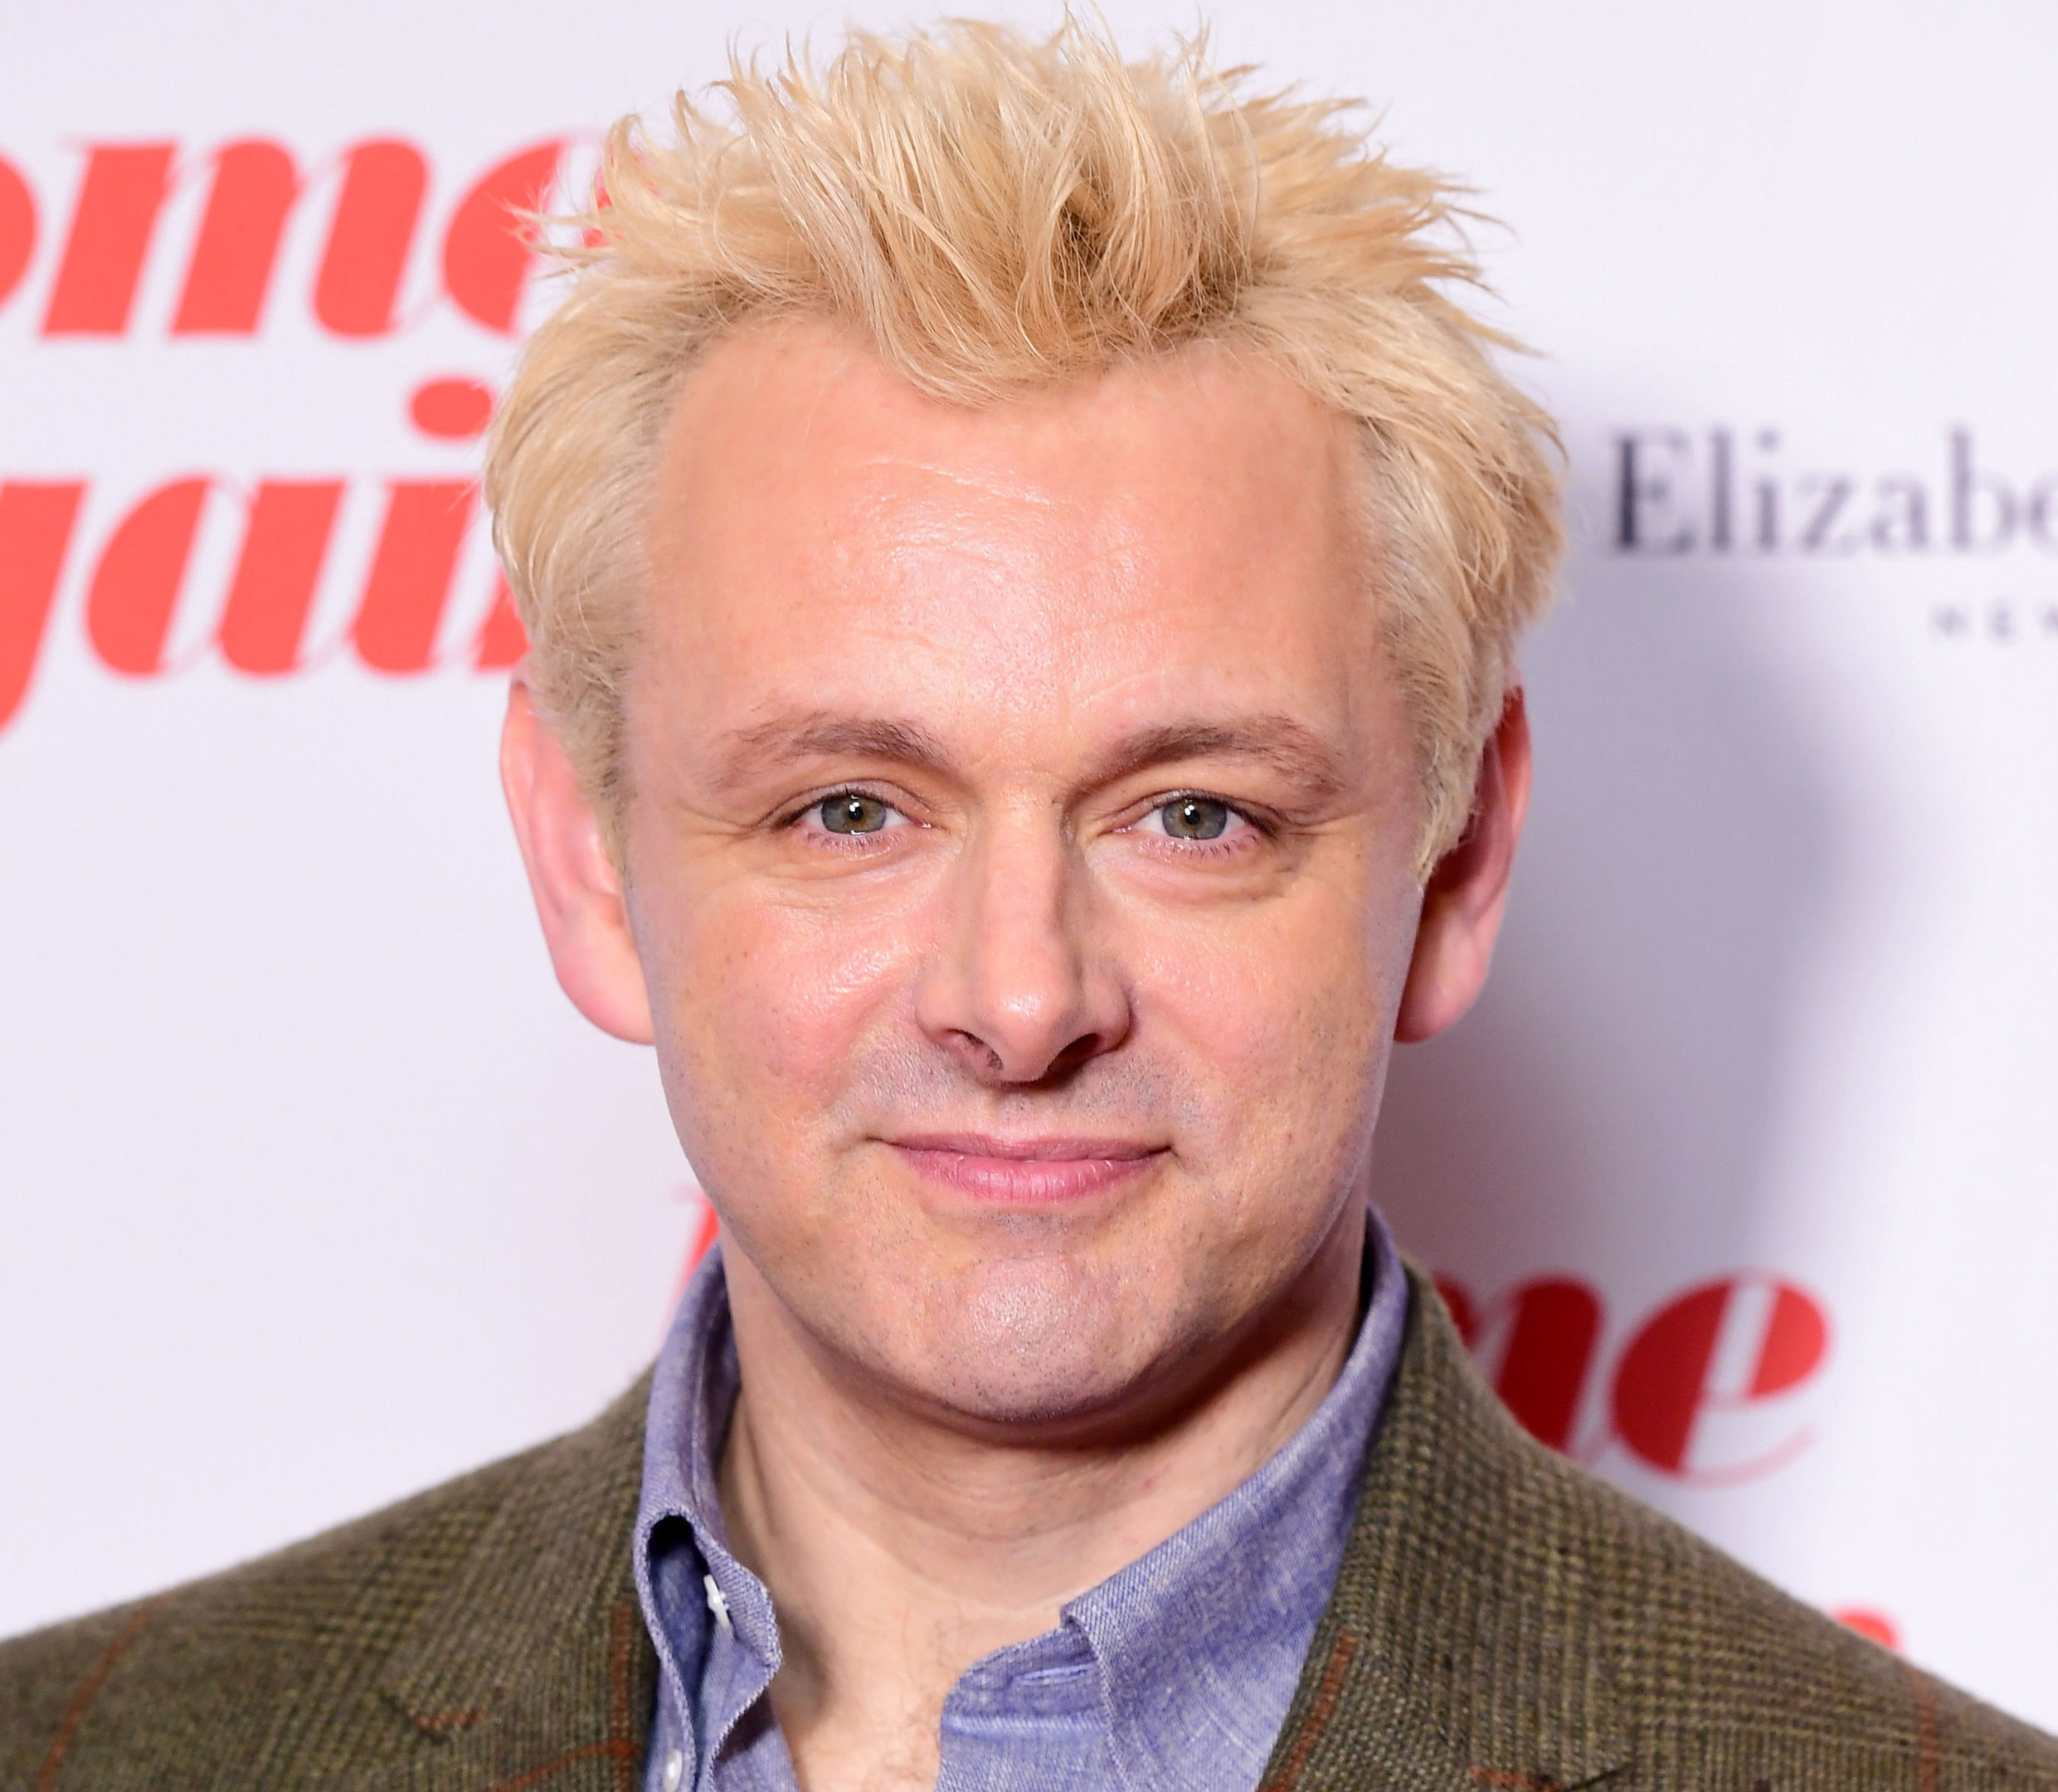 Michael Sheen, who is to speak about tackling financial providers who "unfairly target" vulnerable people at a special event in Glasgow. (Ian West/PA Wire)